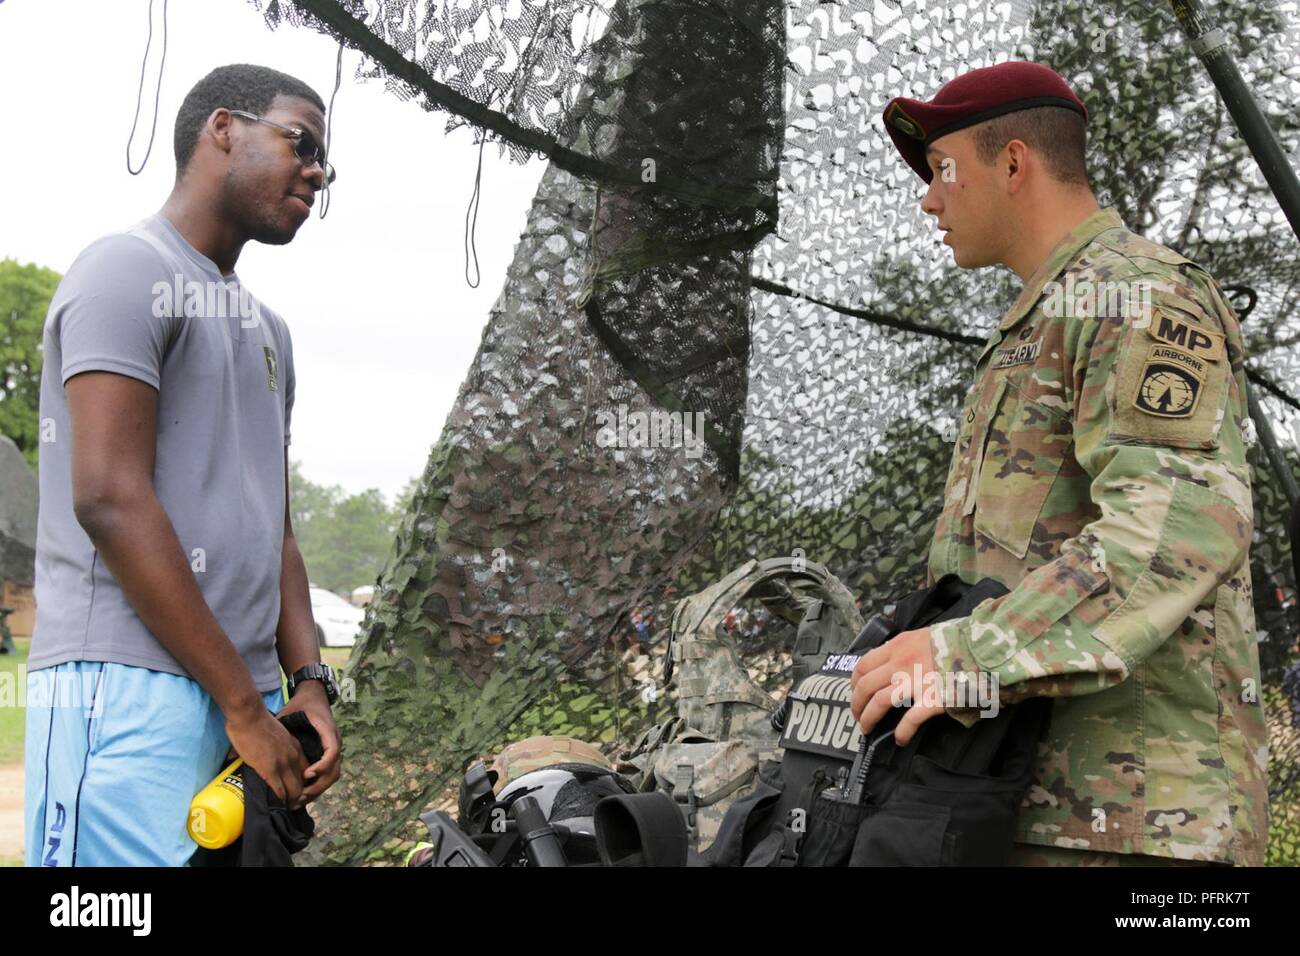 Treyton Reid, a future Soldier with the Raleigh Recruiting Battalion, and a military policeman talk about Soldiers’ equipment and responsibilities during the 82nd Airborne Division’s Airborne Review at Sicily Drop Zone, Fort Bragg, North Carolina, May 24, 2018. Approximately 350 future Soldiers and recruiters from Raleigh Recruiting Battalion attended the Airborne Review and toured Fort Bragg during All American Week. Stock Photo